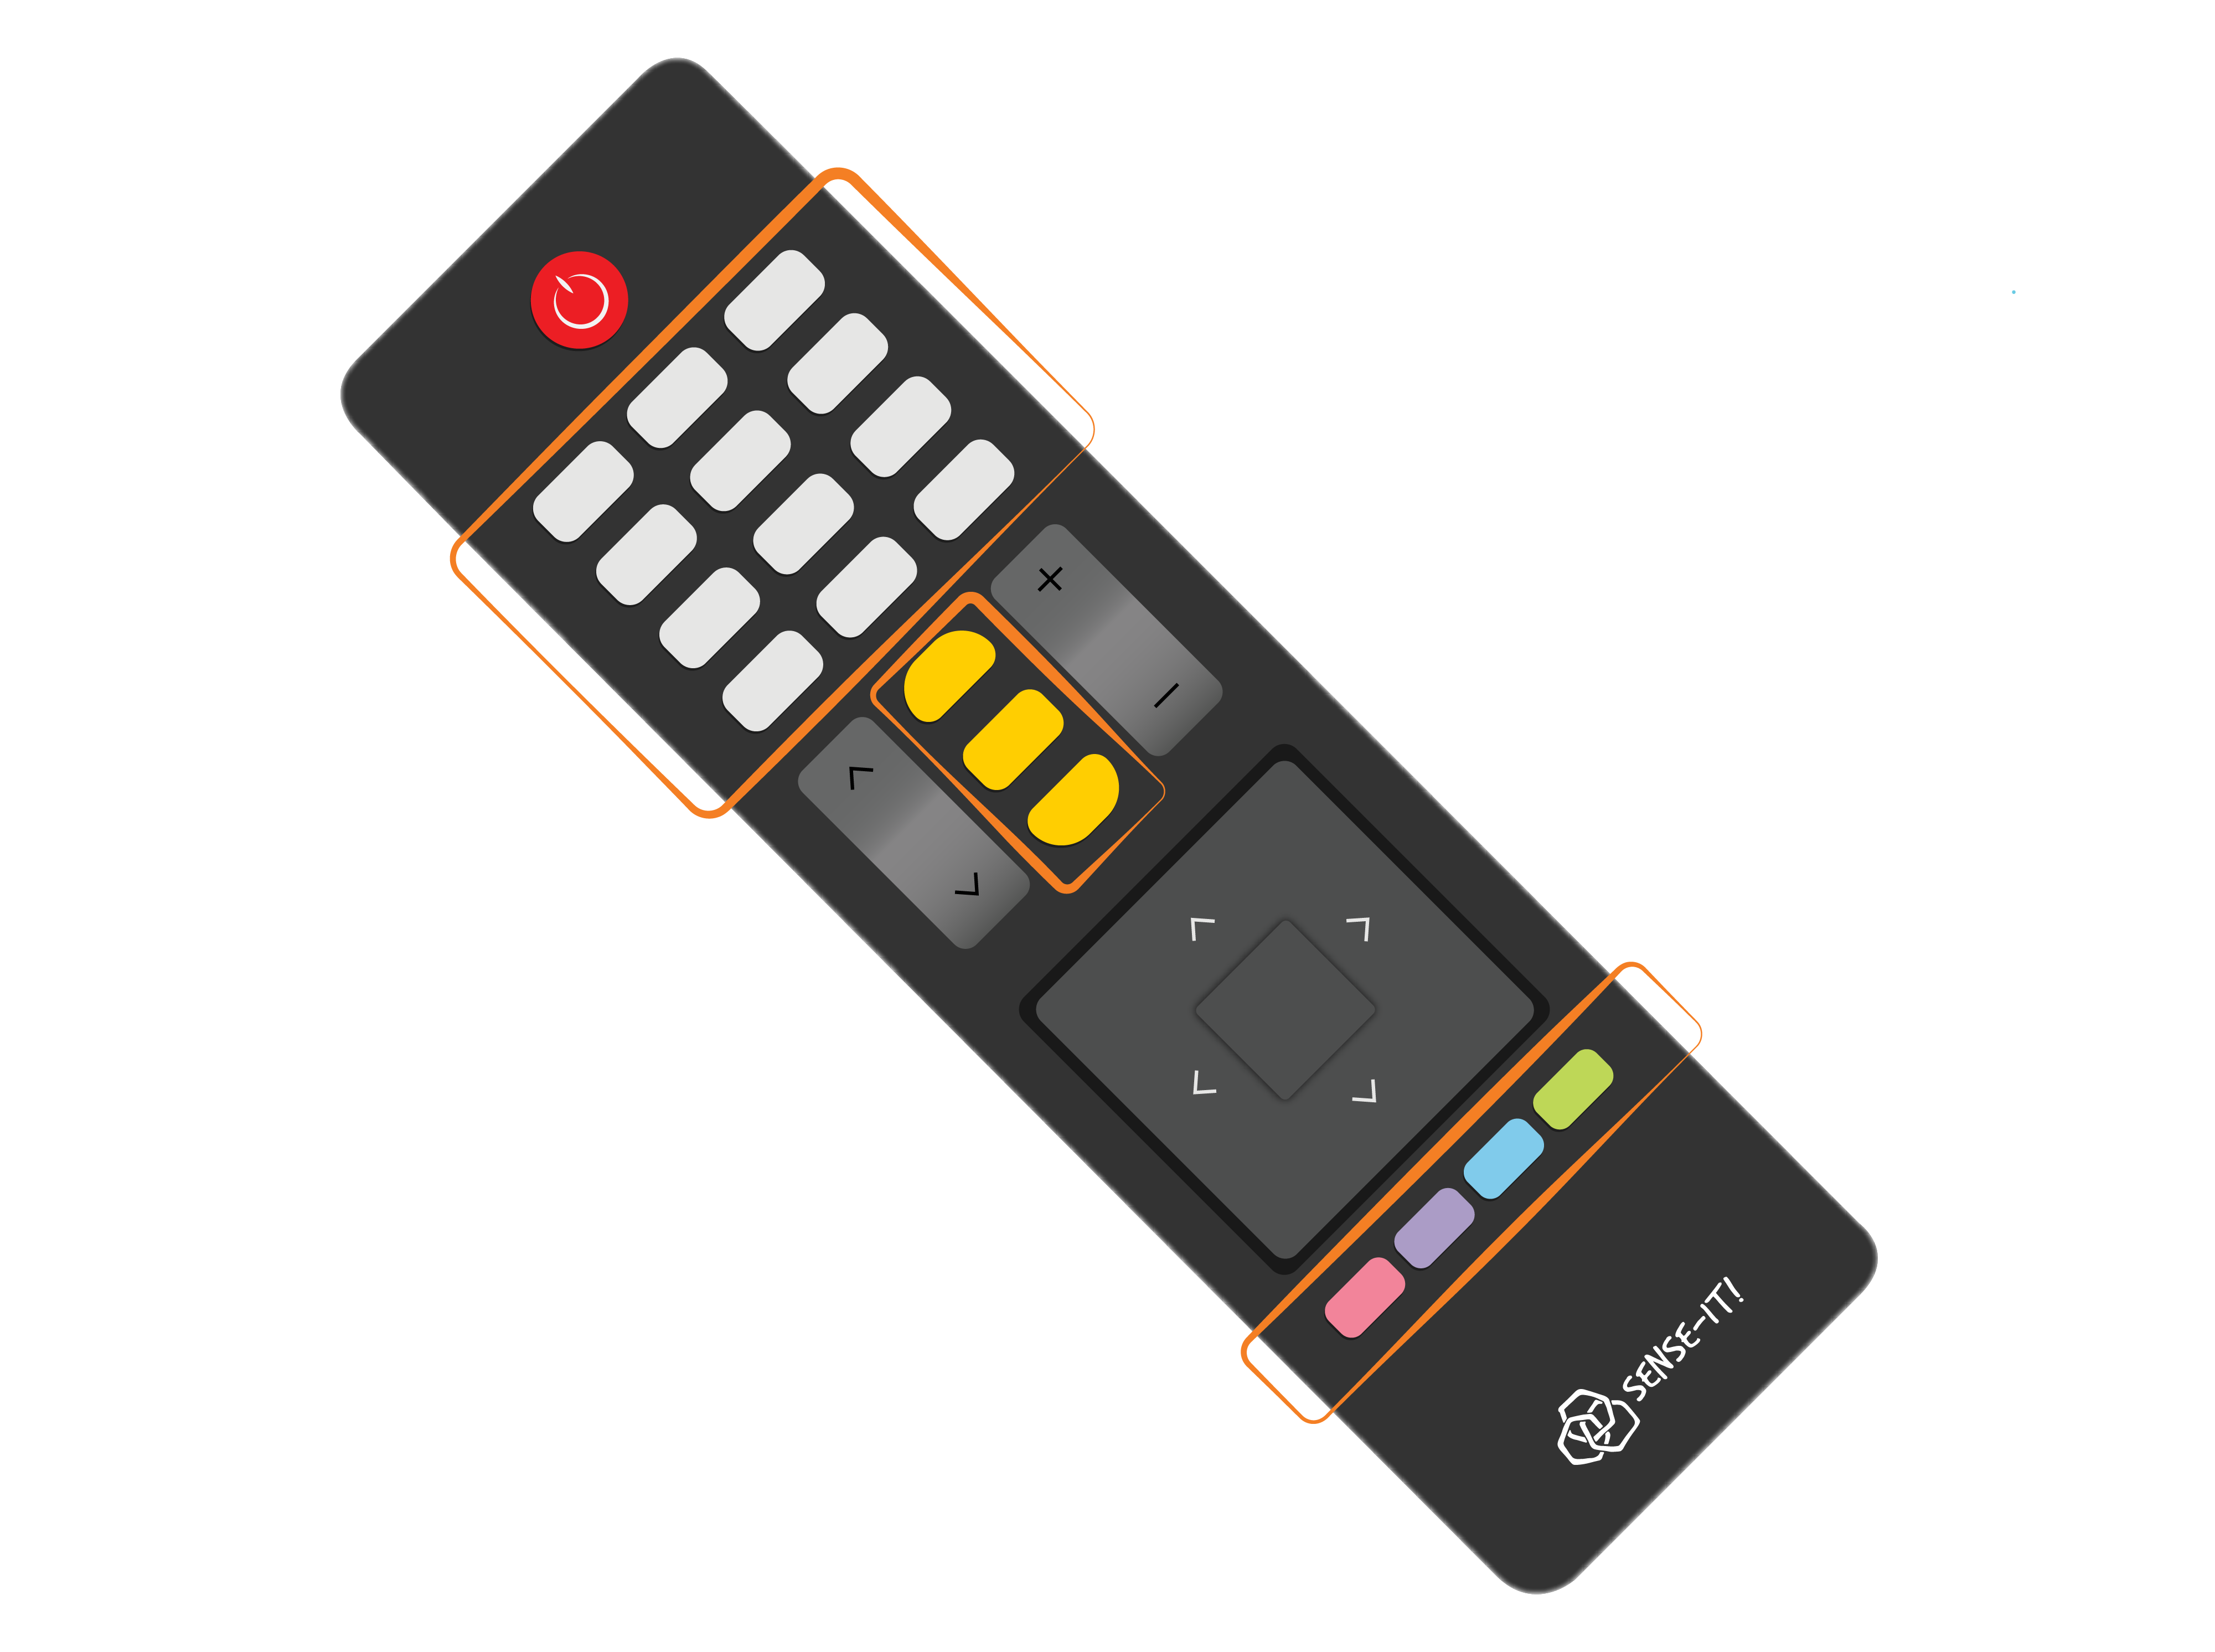 An illustration of a video remote controller shows similar-looking buttons grouped together in 3 distinct groupings.